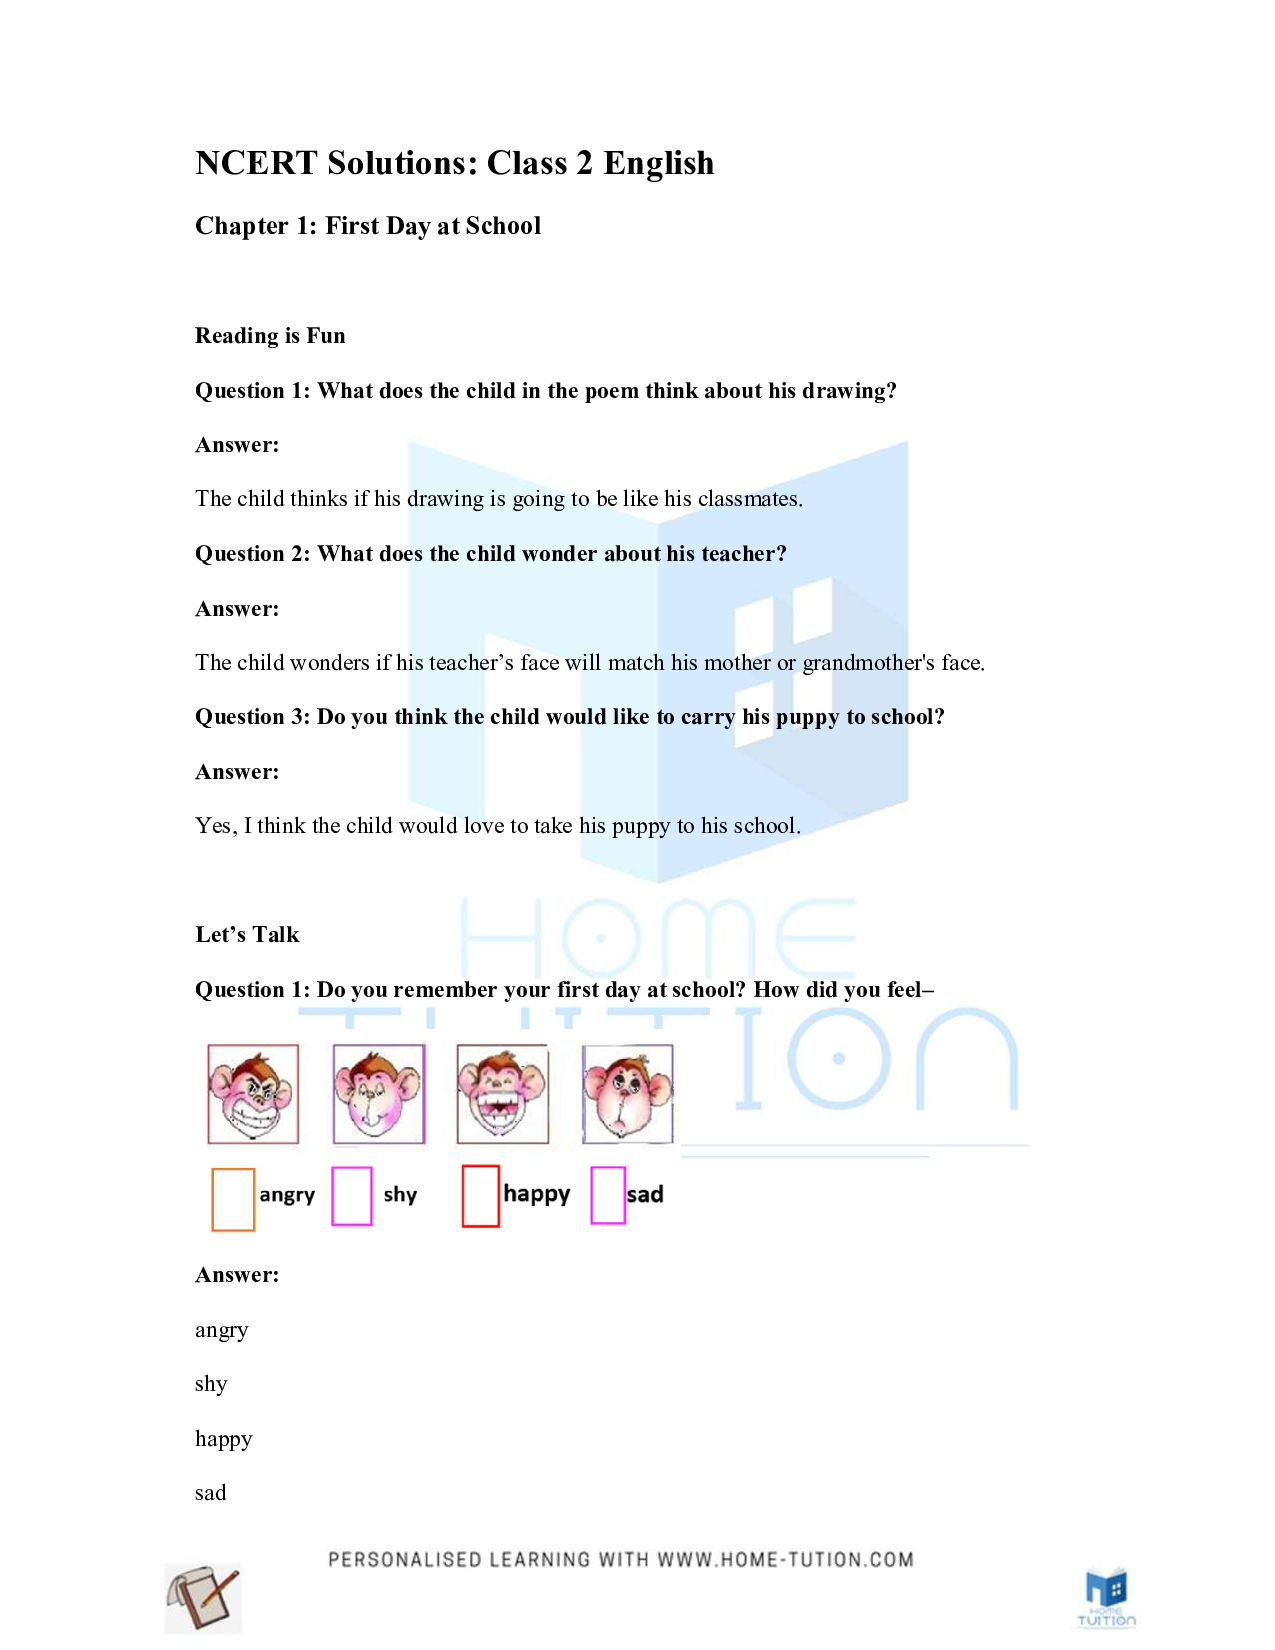 NCERT Solutions for Class 2 English Marigold Chapter 1 First Day at School